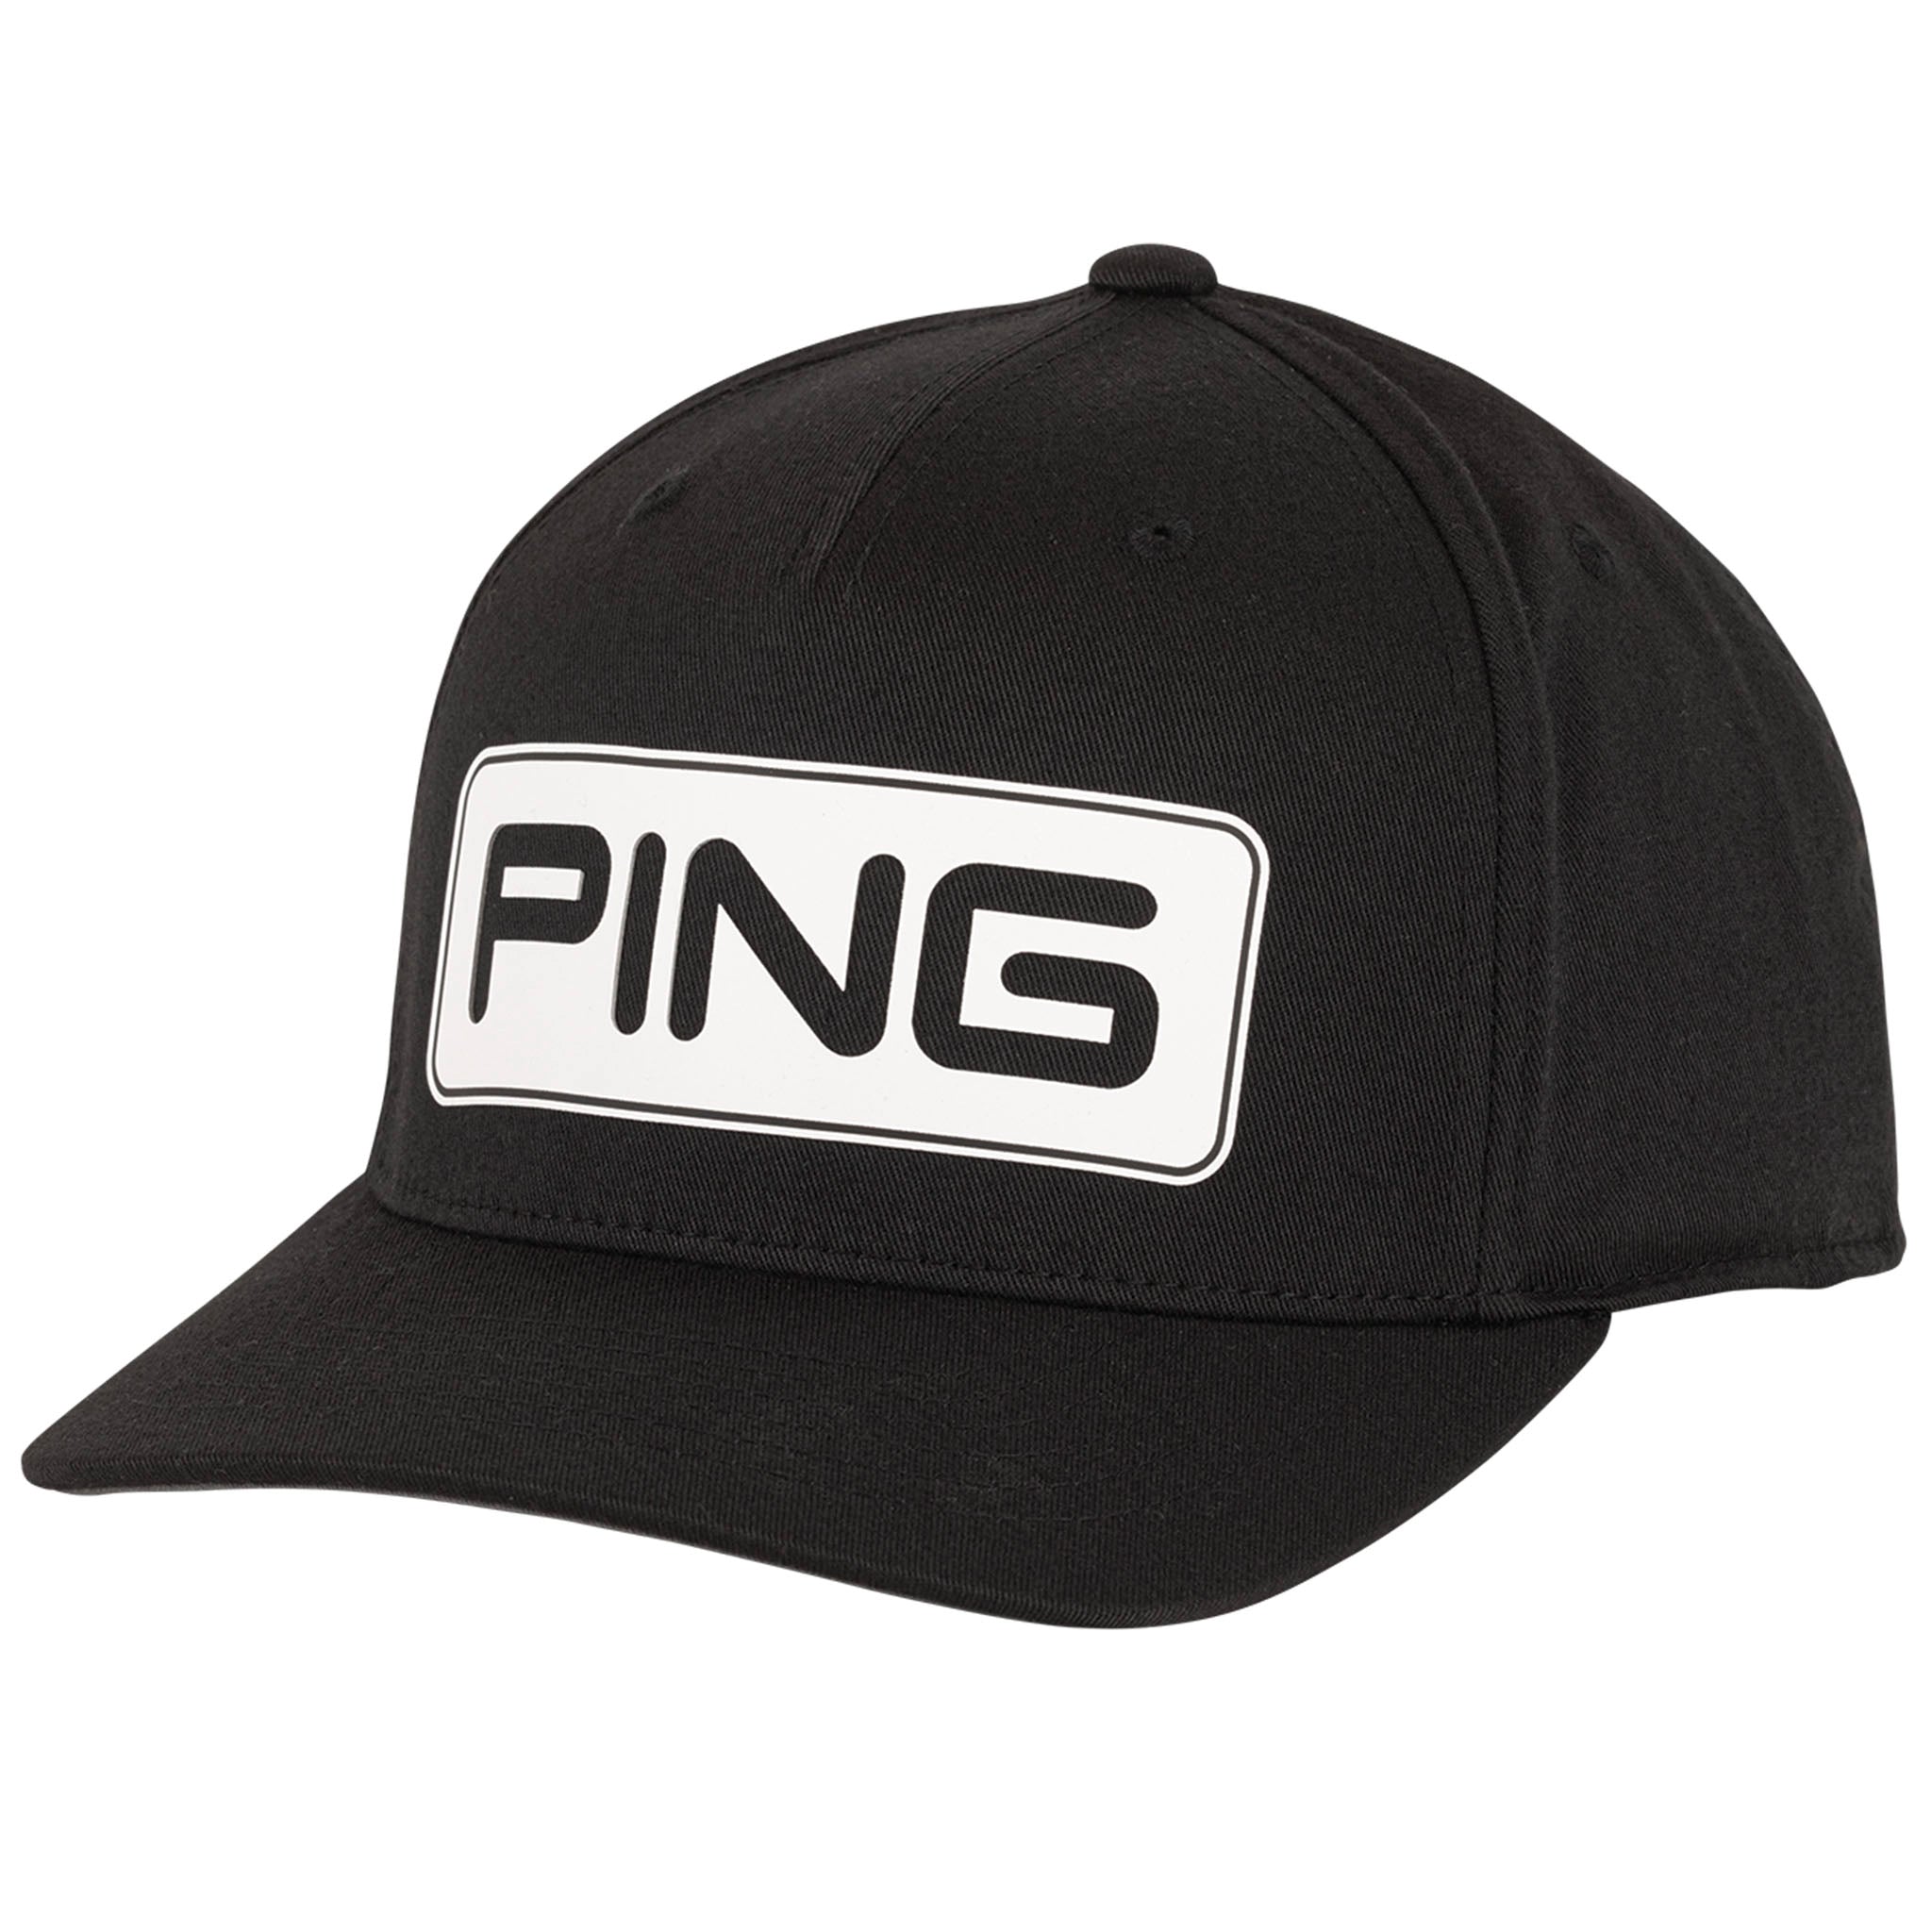 House of Mens Caps The — Golf Golf